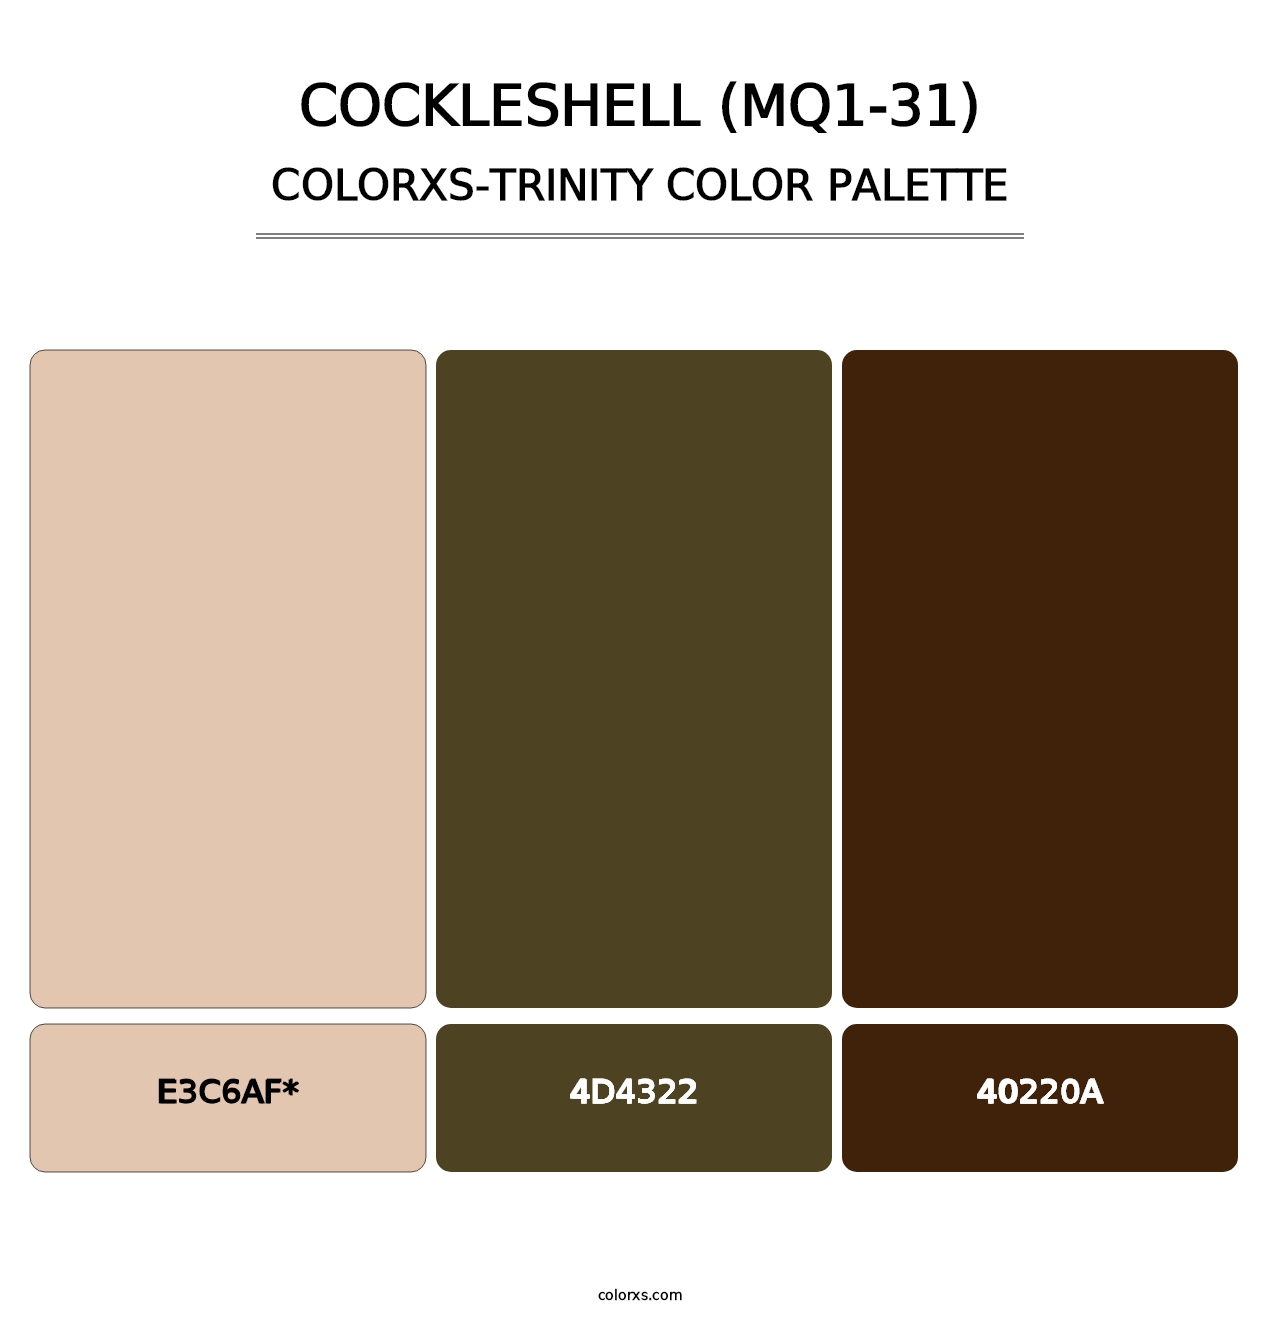 Cockleshell (MQ1-31) - Colorxs Trinity Palette